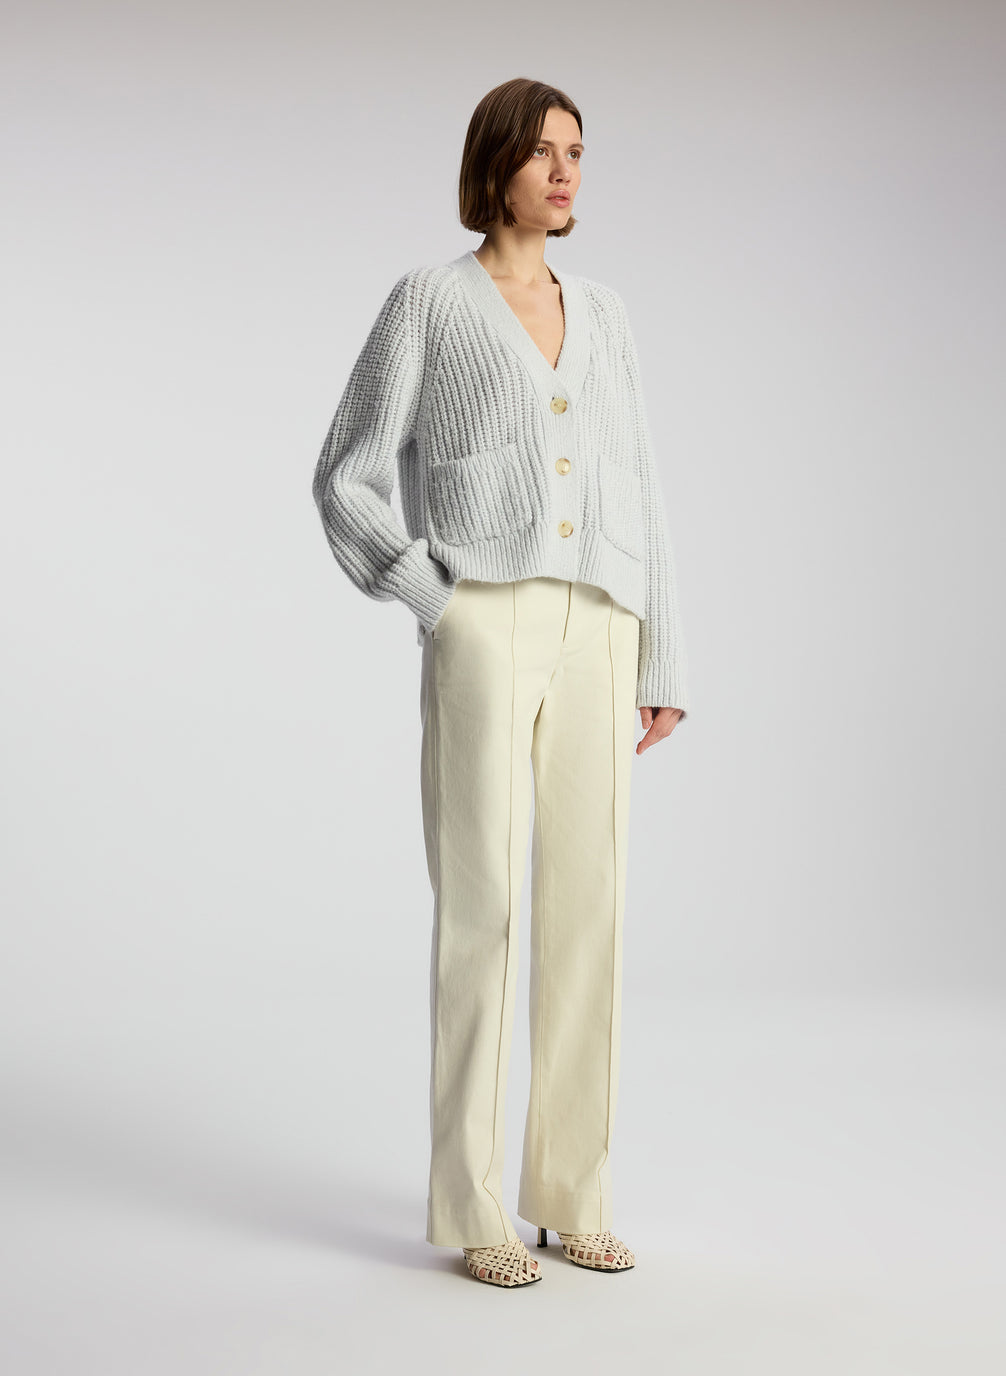 side view of woman wearing beige pants and blue cardigan